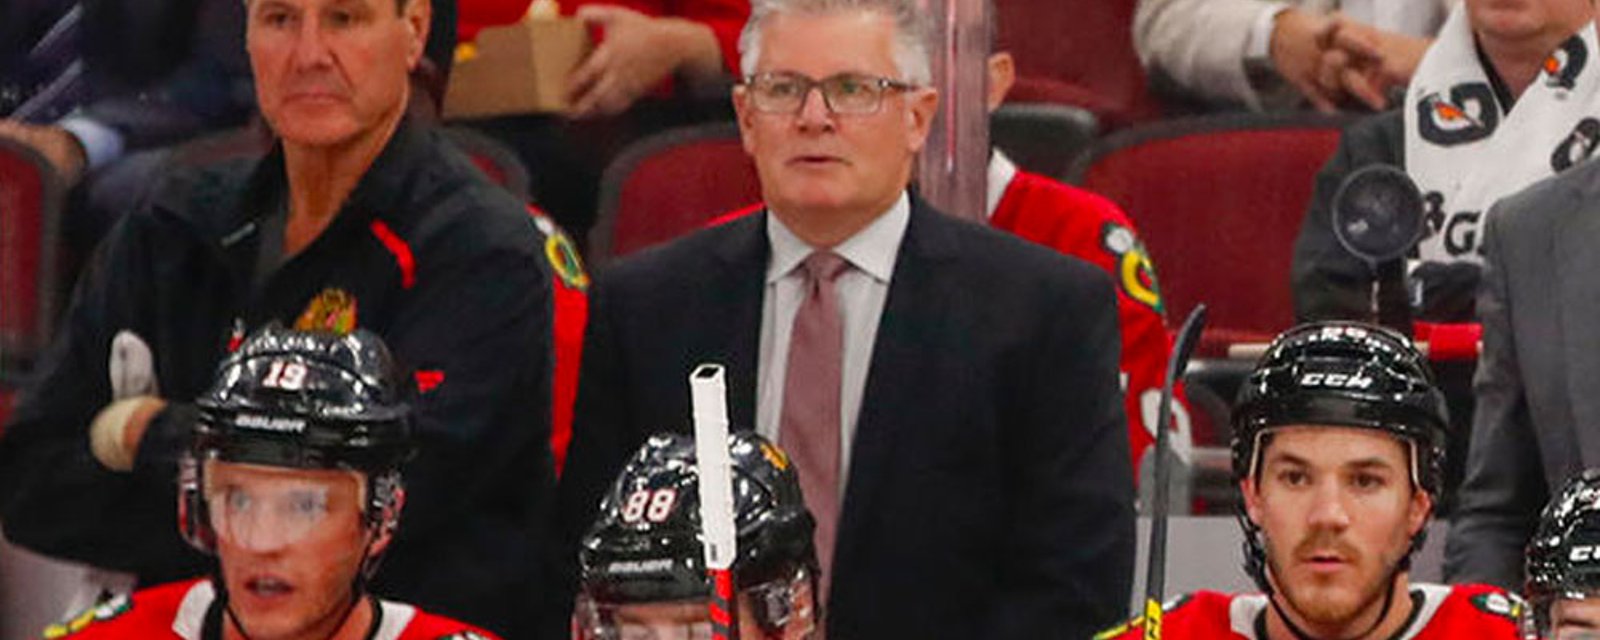 Crawford issues statement amidst allegations of abuse and forced leave from Blackhawks